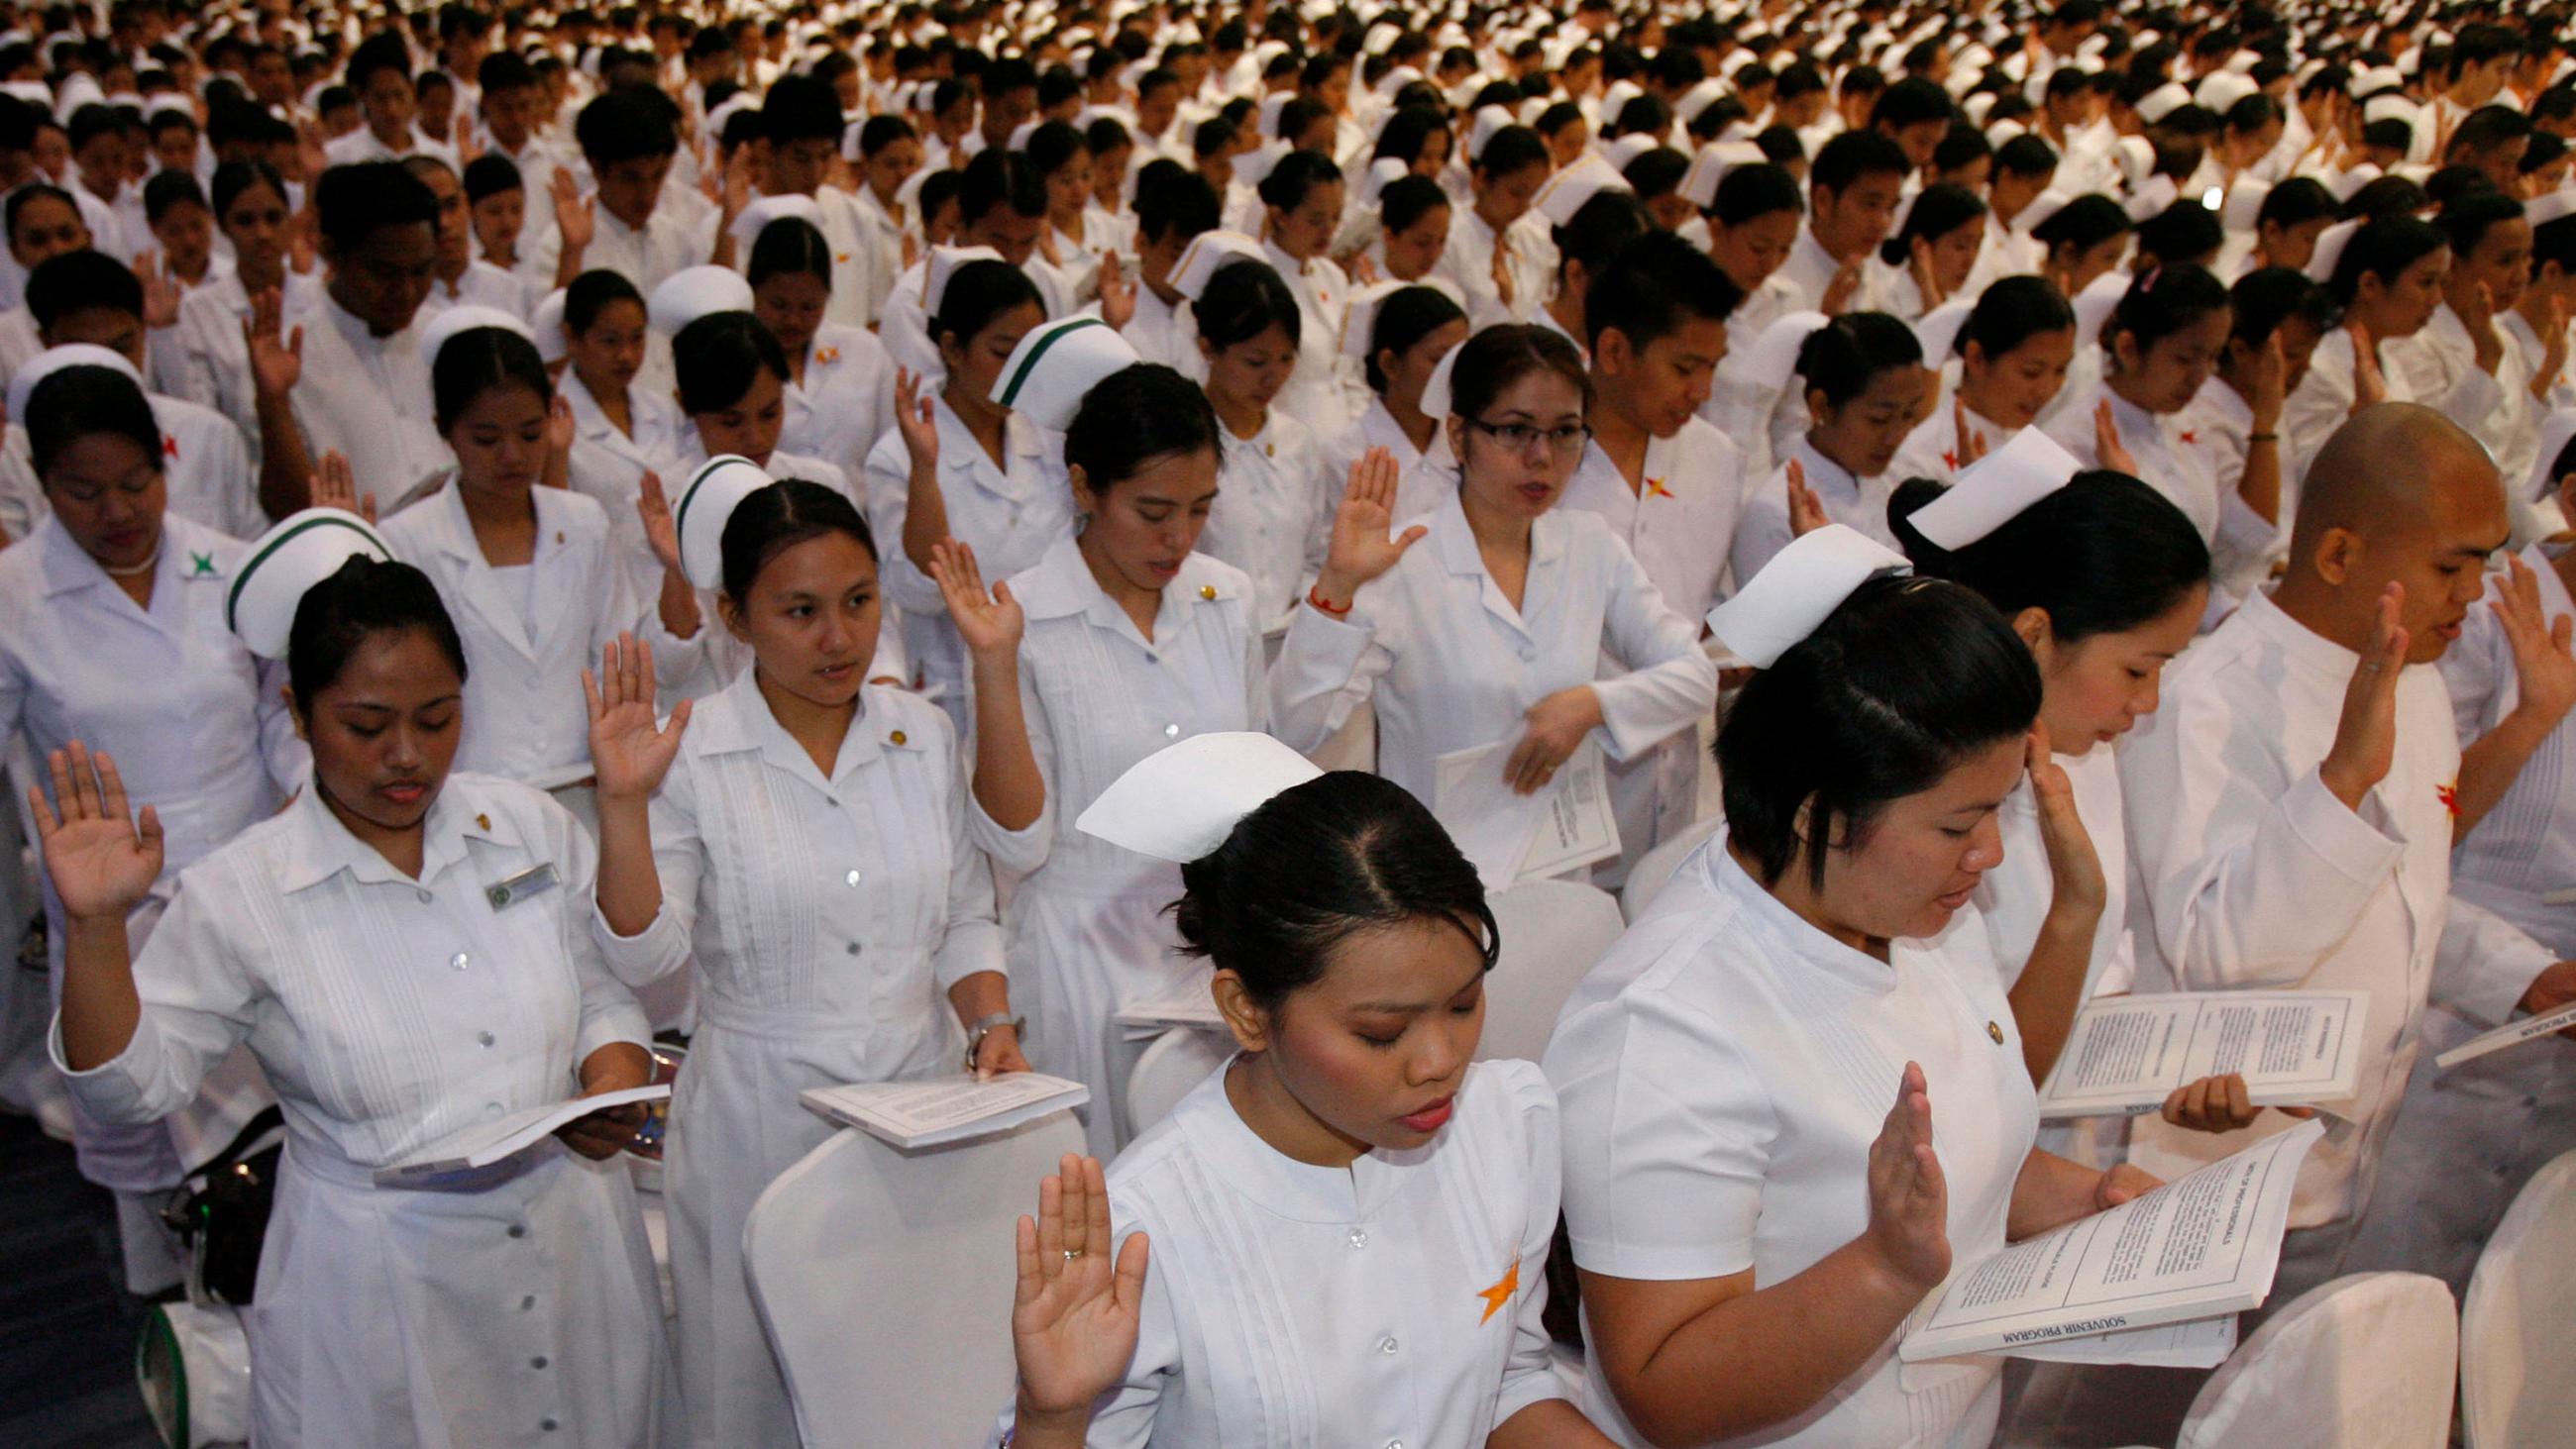  Picture shows thousands and thousands of nurses in uniform lined up with right hands raised reading from a thick packet. The women have traditional nurse caps, but the men's heads are bare. 